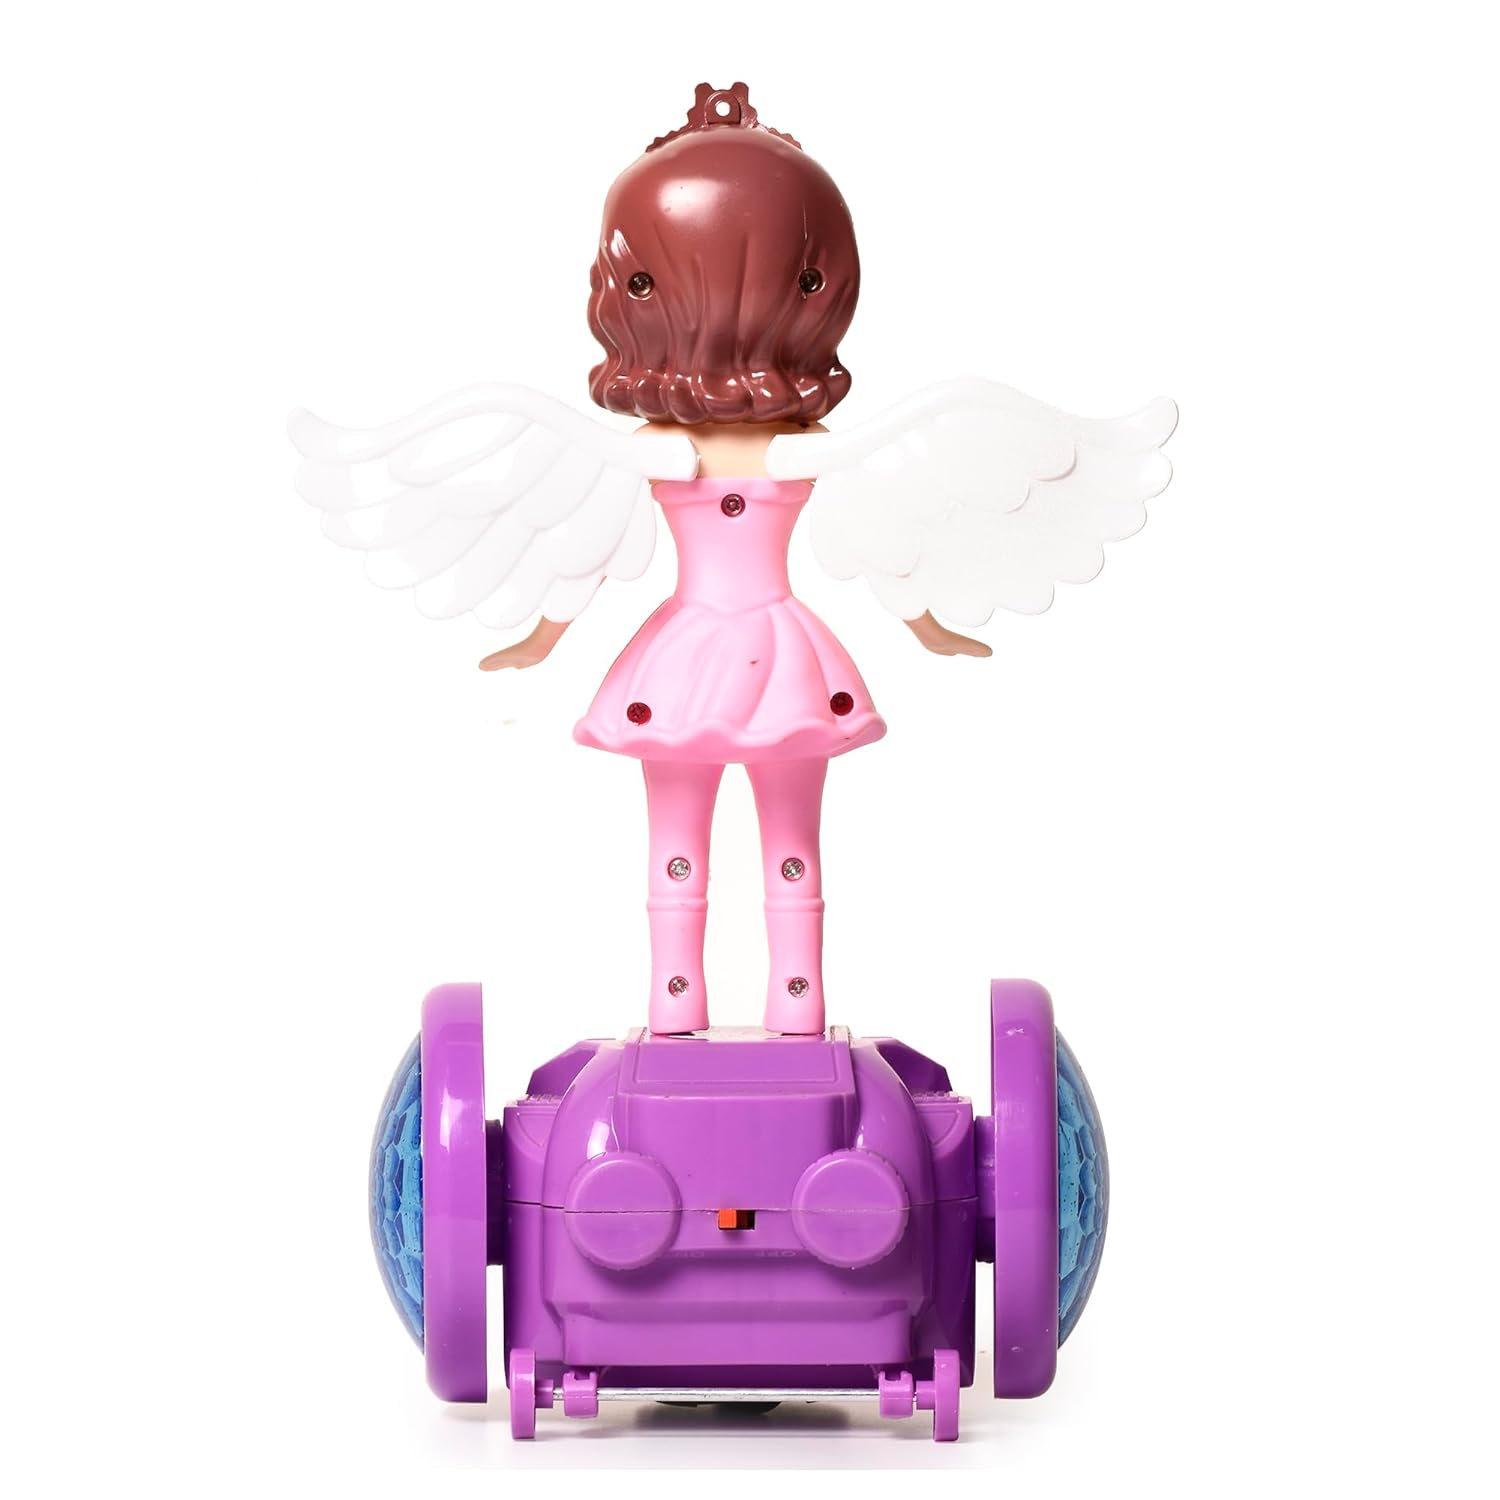 Braintastic Princess Balancing Car Doll Interactive Revolving Cute Doll Colorful LED Lights and Music Toy for Girls